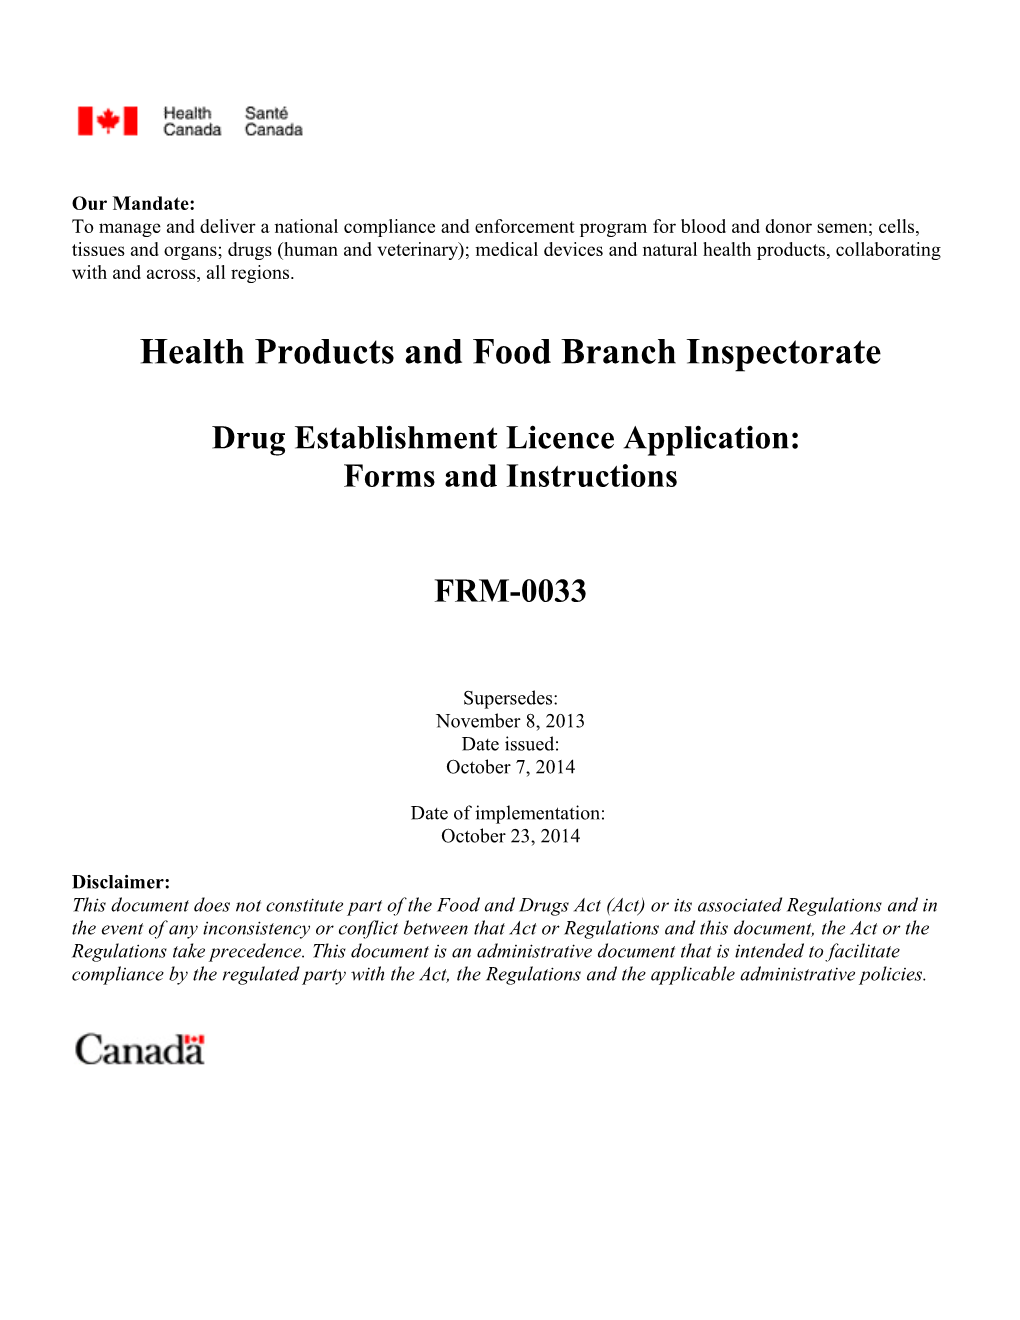 Health Canada / Health Products and Food Branch Inspectorate